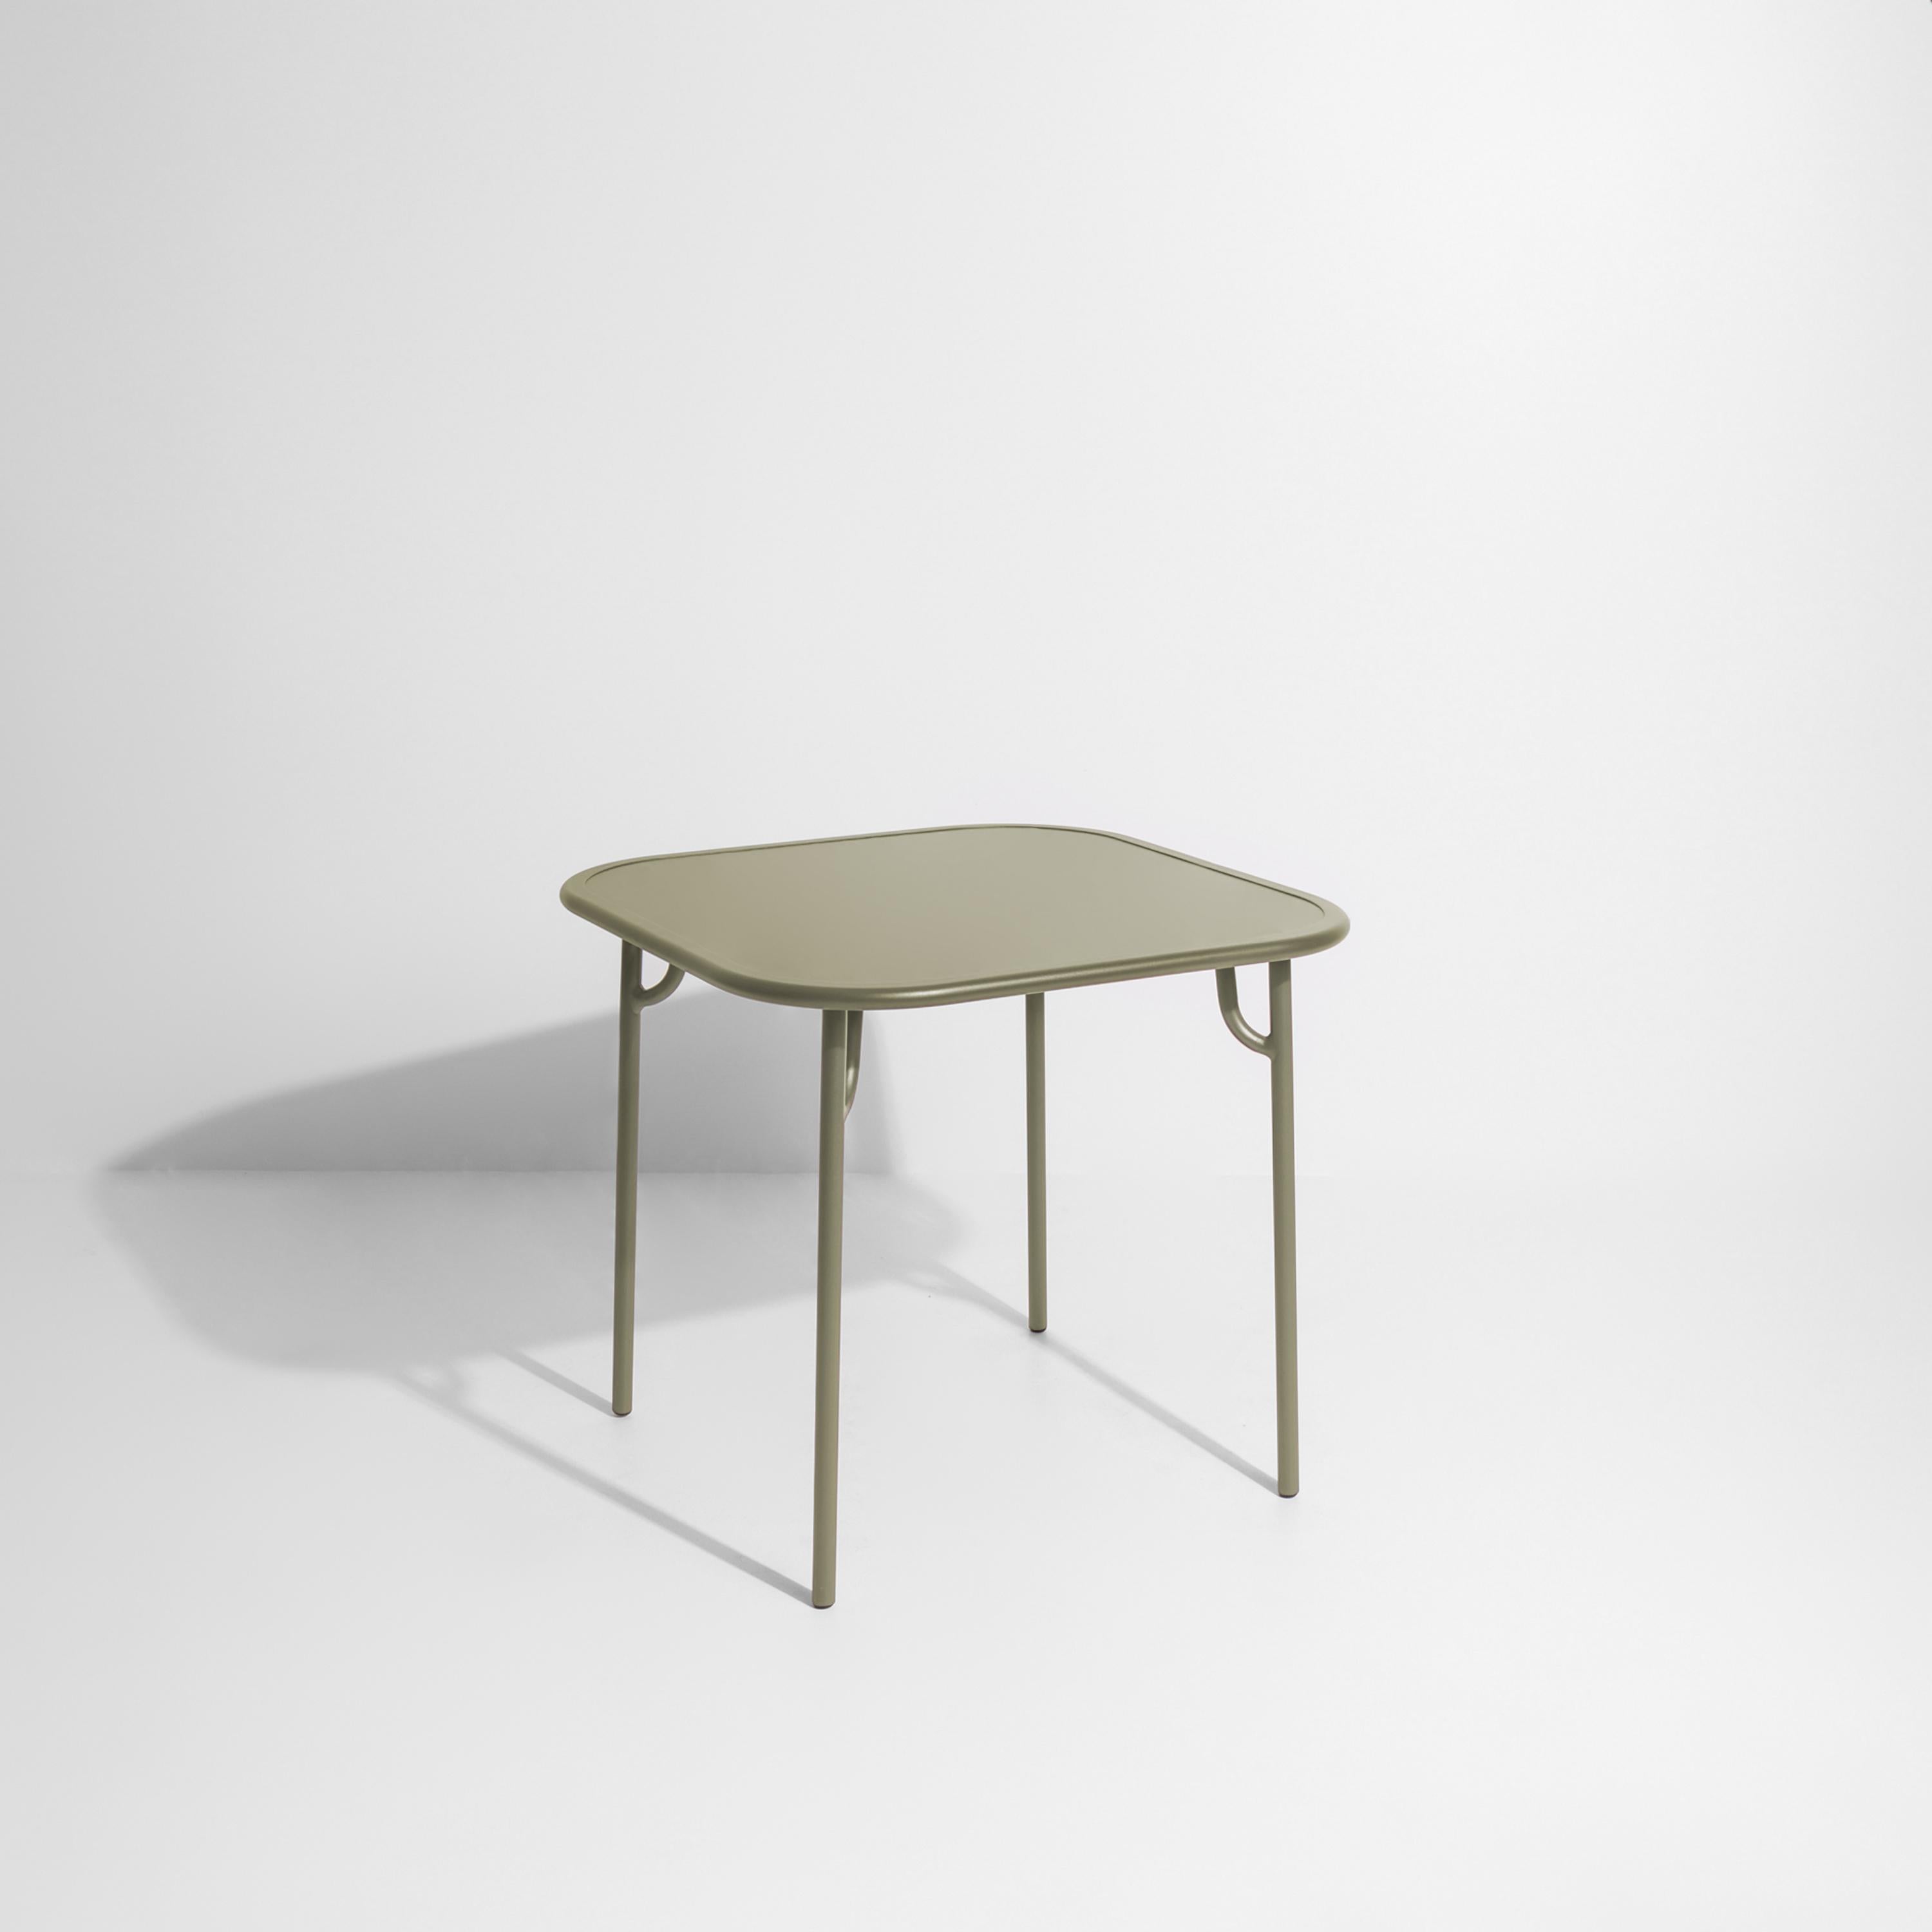 Petite Friture Week-End Plain Square Dining Table in Jade Green Aluminium by Studio BrichetZiegler, 2017

The week-end collection is a full range of outdoor furniture, in aluminium grained epoxy paint, matt finish, that includes 18 functions and 8